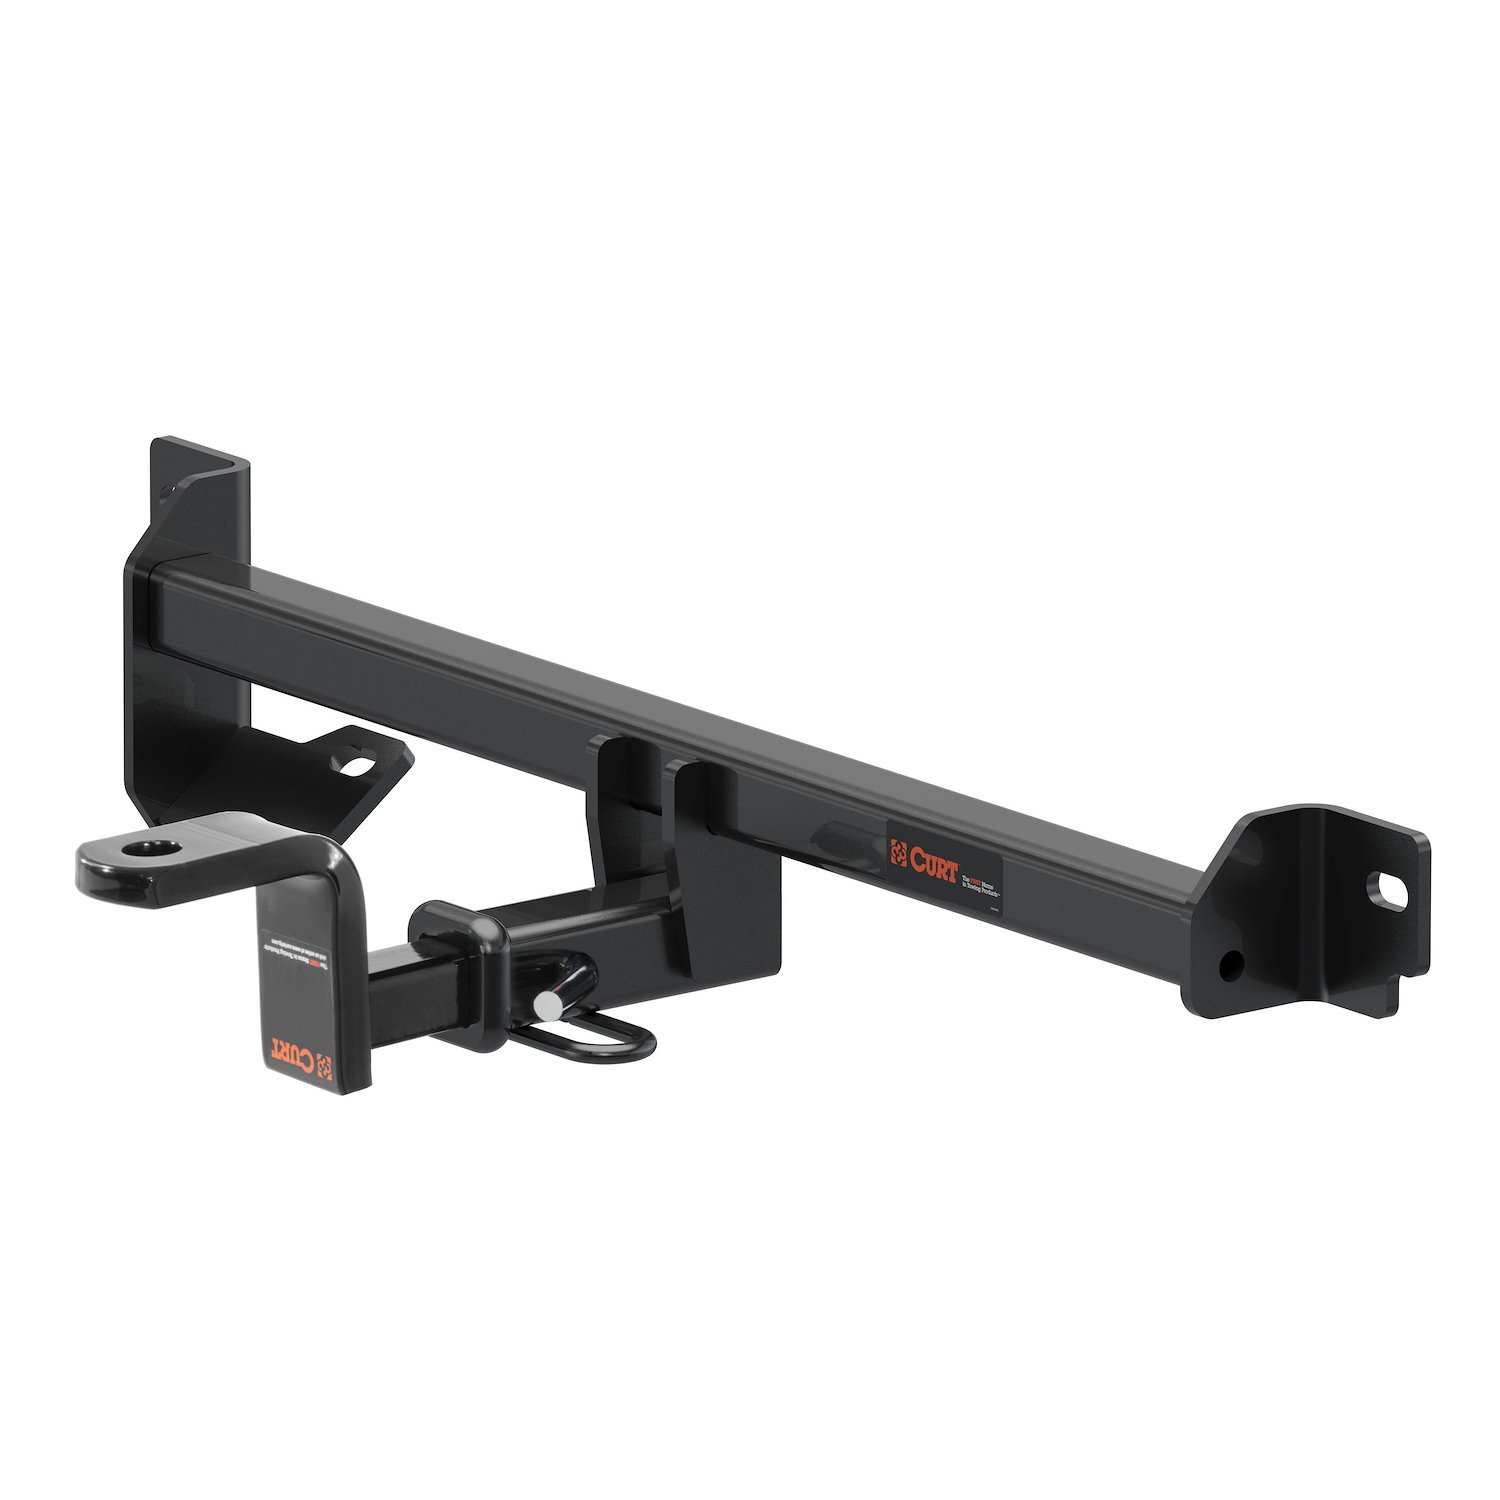 Class 1 Trailer Hitch with Ball Mount